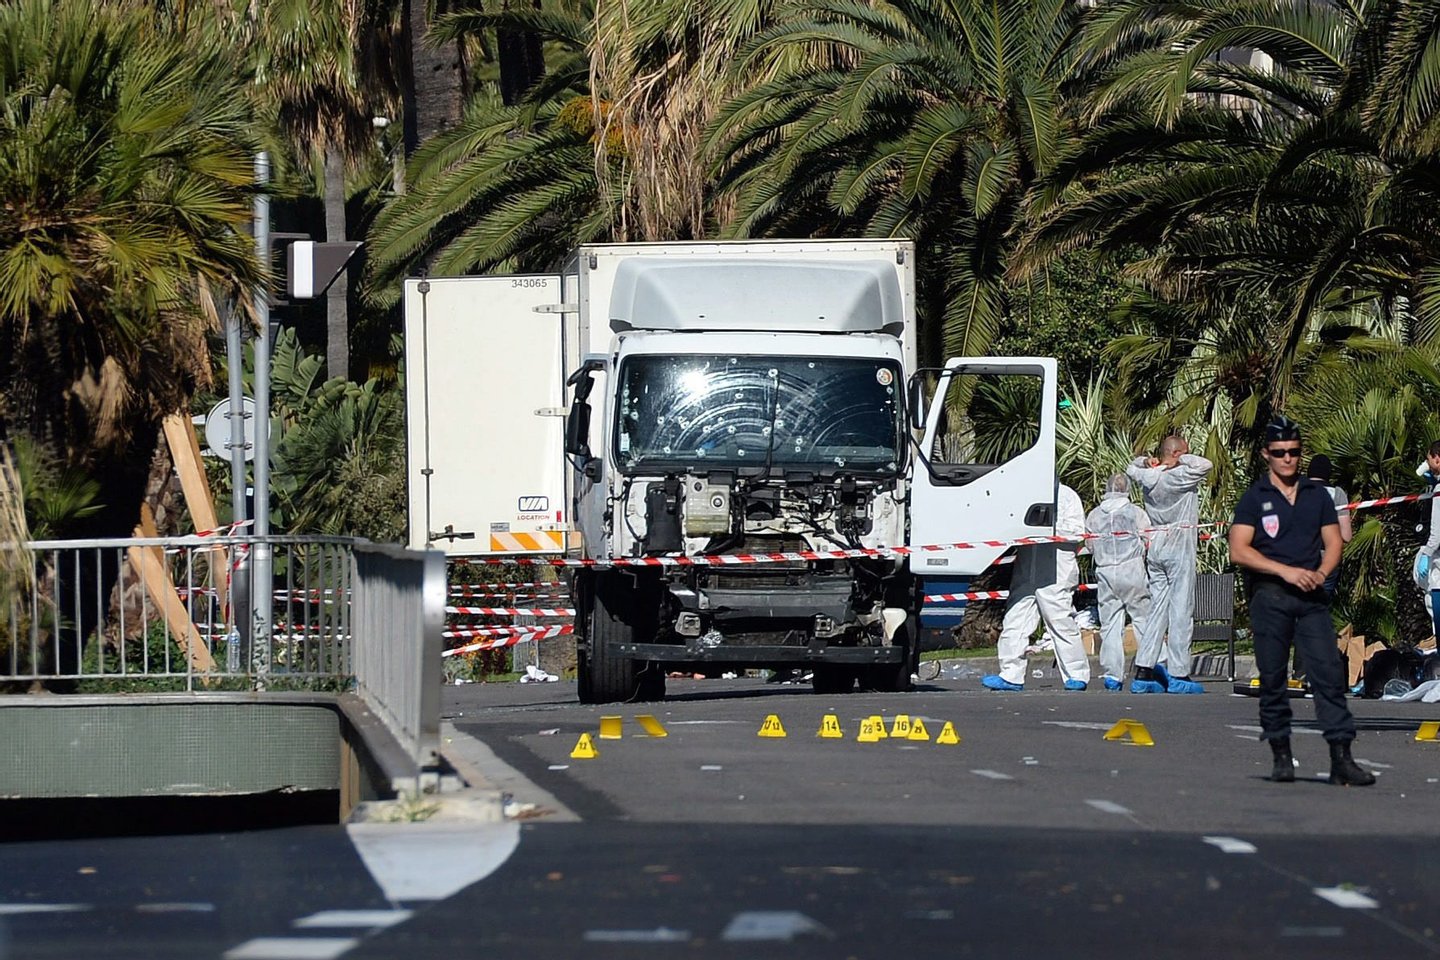 Police secure the area where a truck drove into a crowd during Bastille Day celebrations in Nice, France, 15 July 2016. According to reports, at least 84 people died and many were injured after a truck drove into the crowd on the famous Promenade des Anglais during celebrations of Bastille Day in Nice, late 14 July. Anti-terrorism police took over the investigation in the incident, media added. EPA/ANDREAS GEBERT